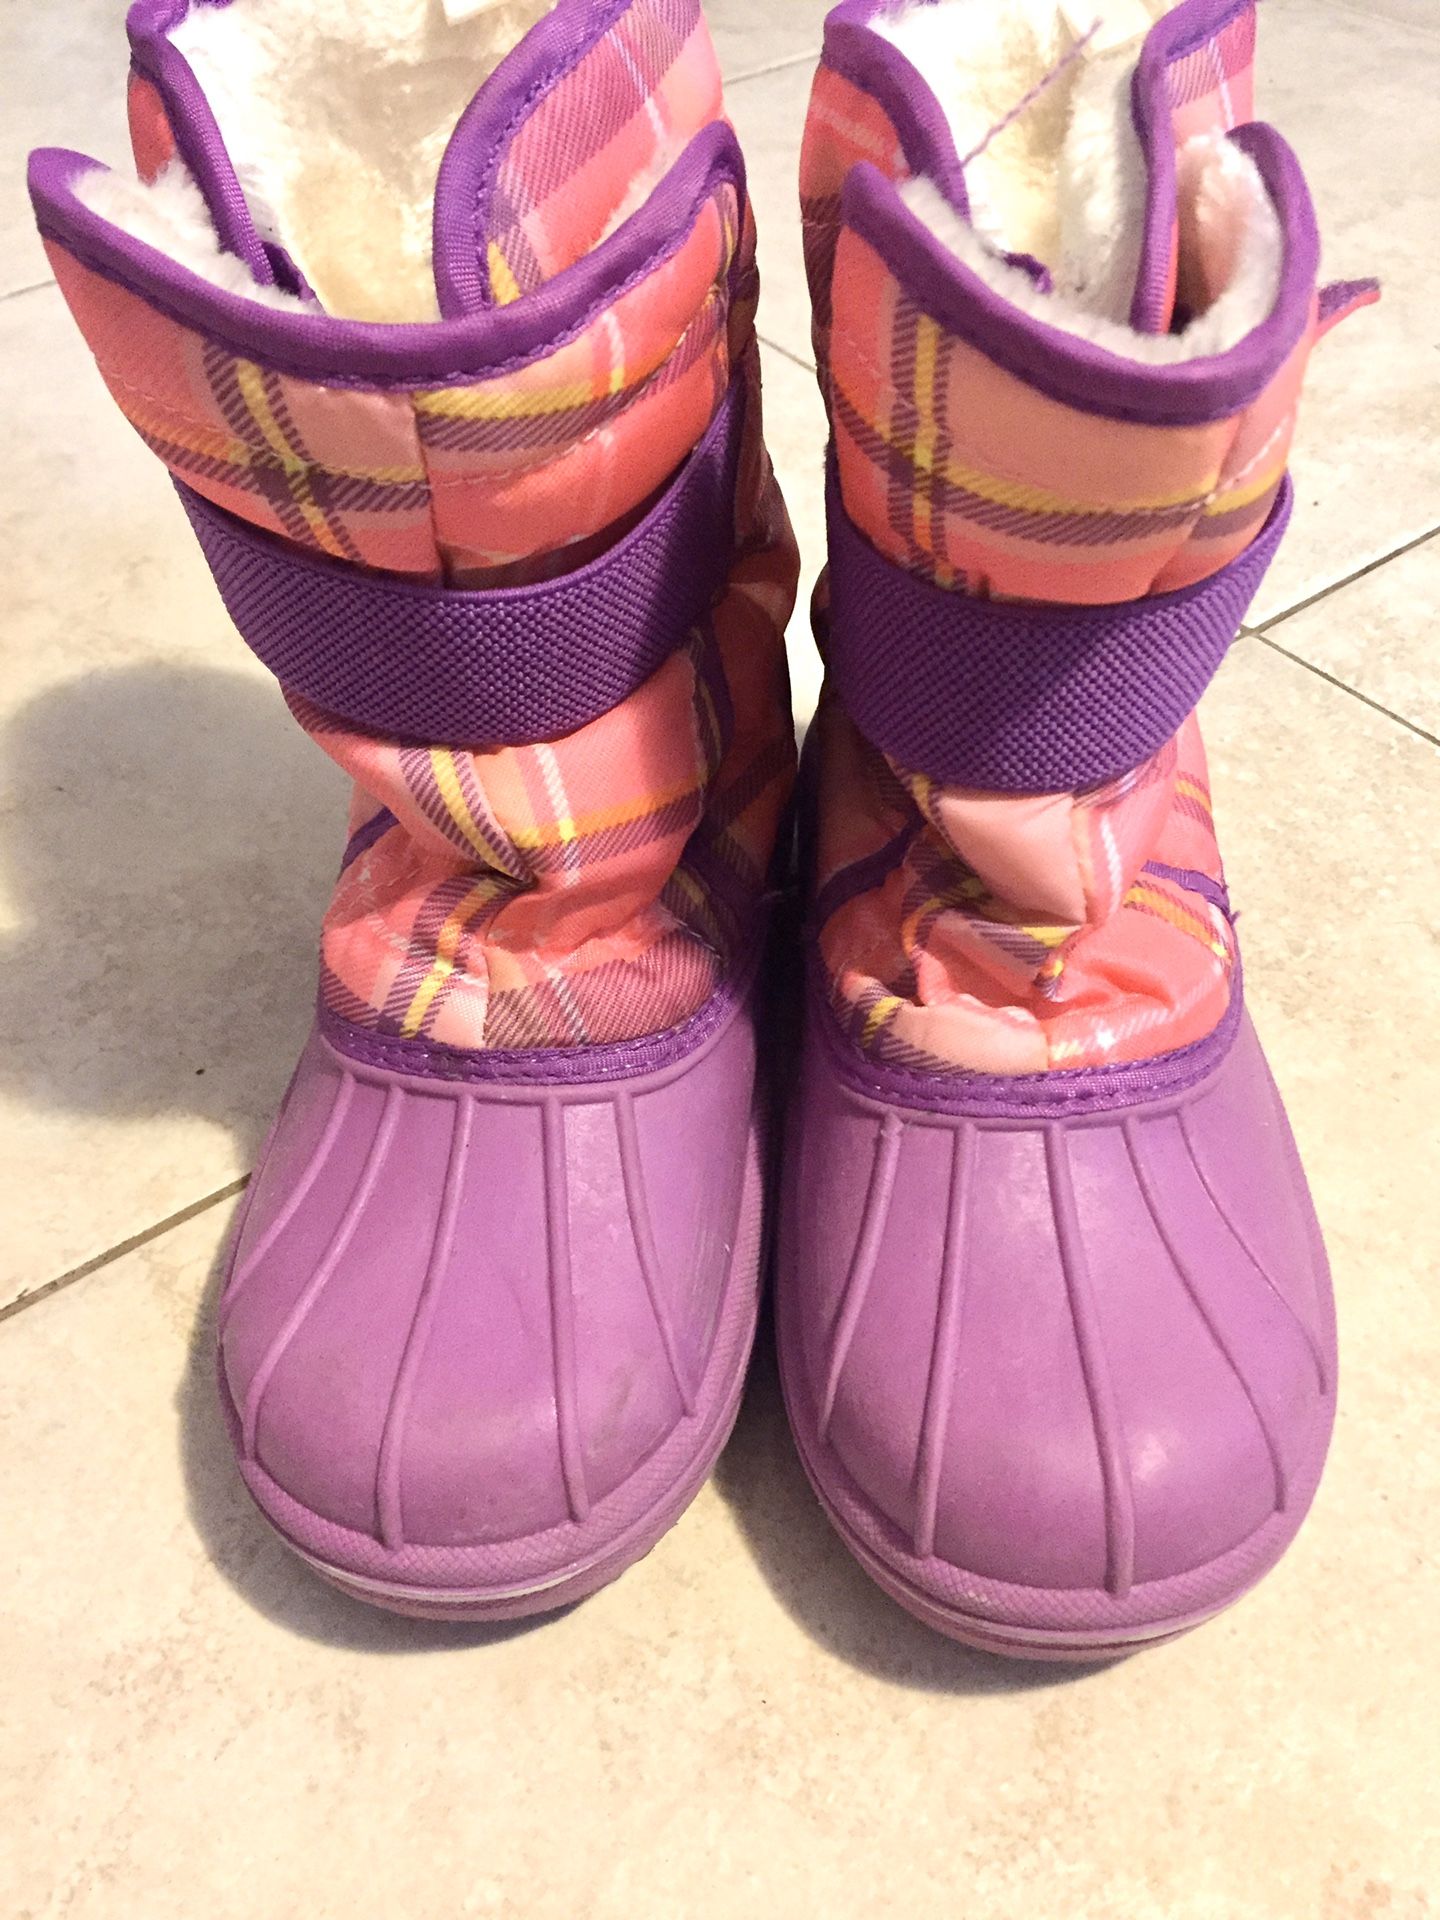 The Children's place kids Winter boots